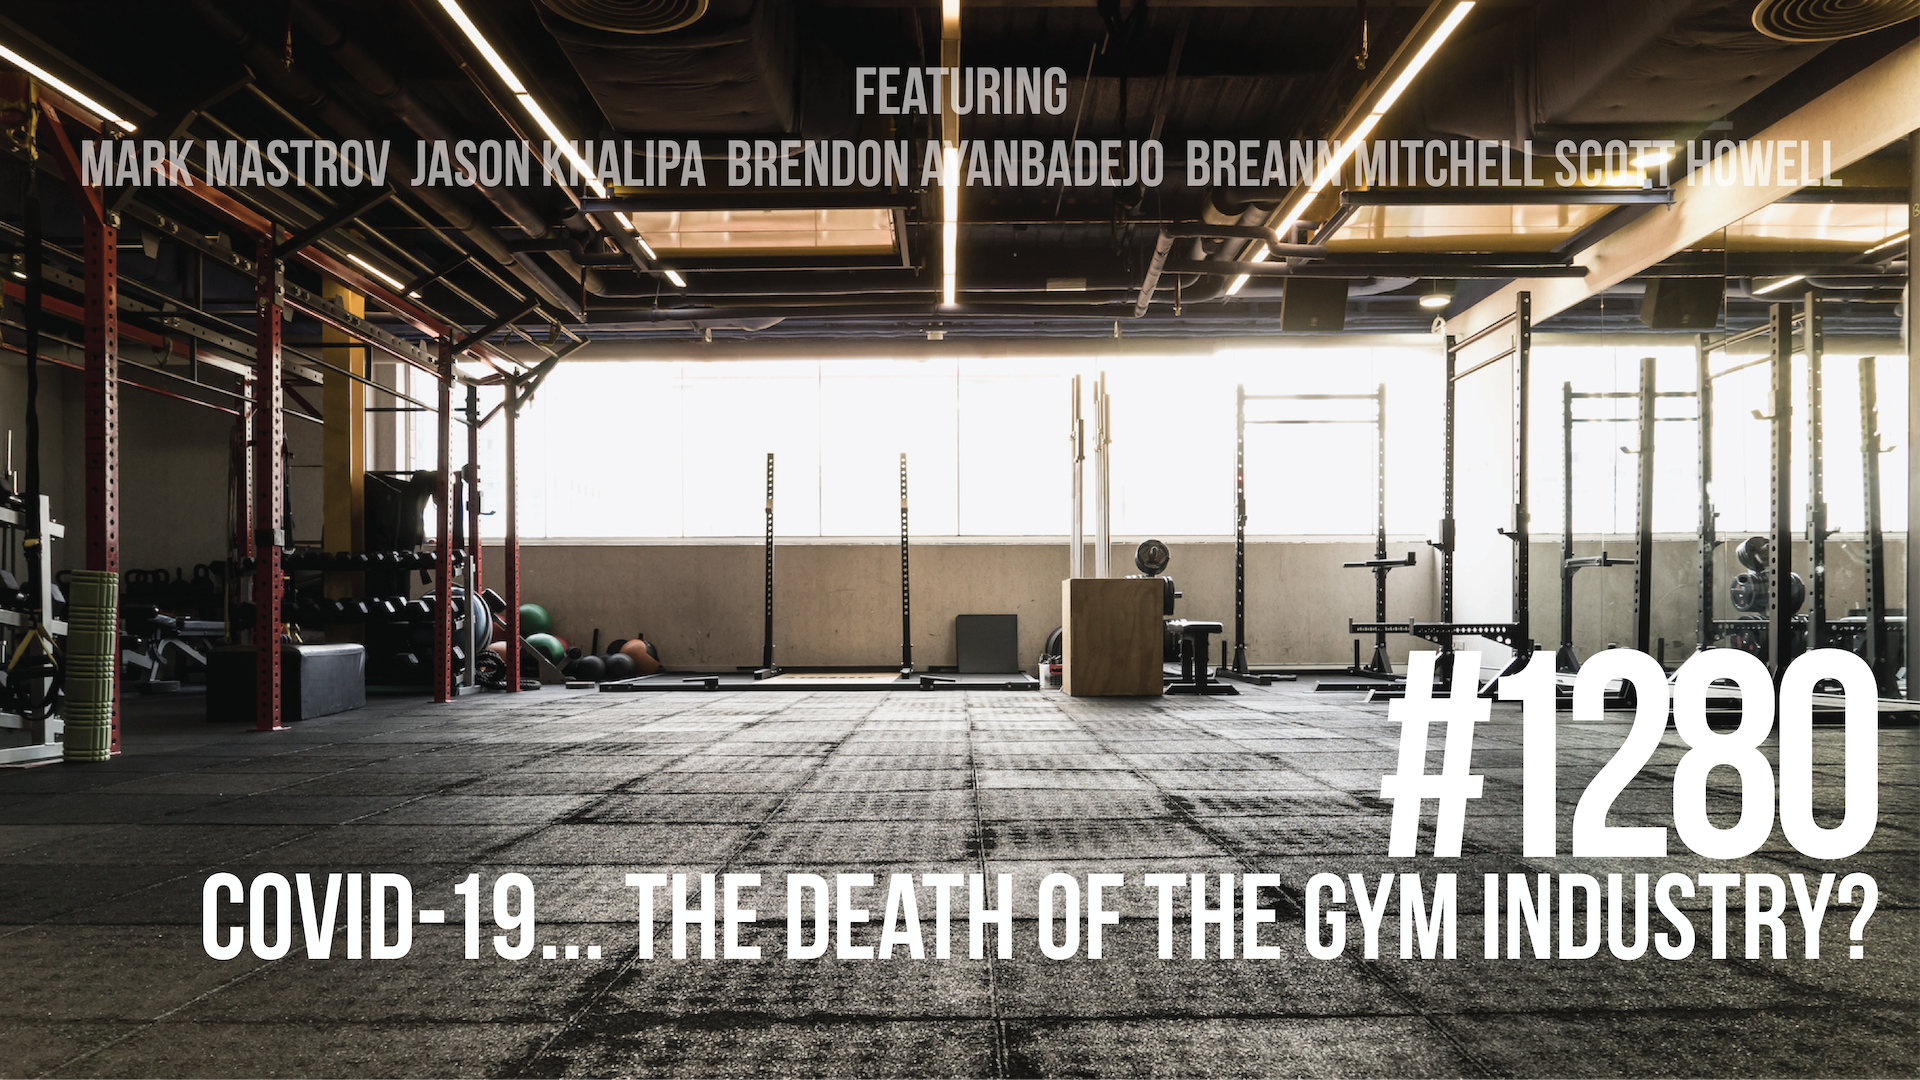 1280: COVID-19 – The Death of the Gym Industry?